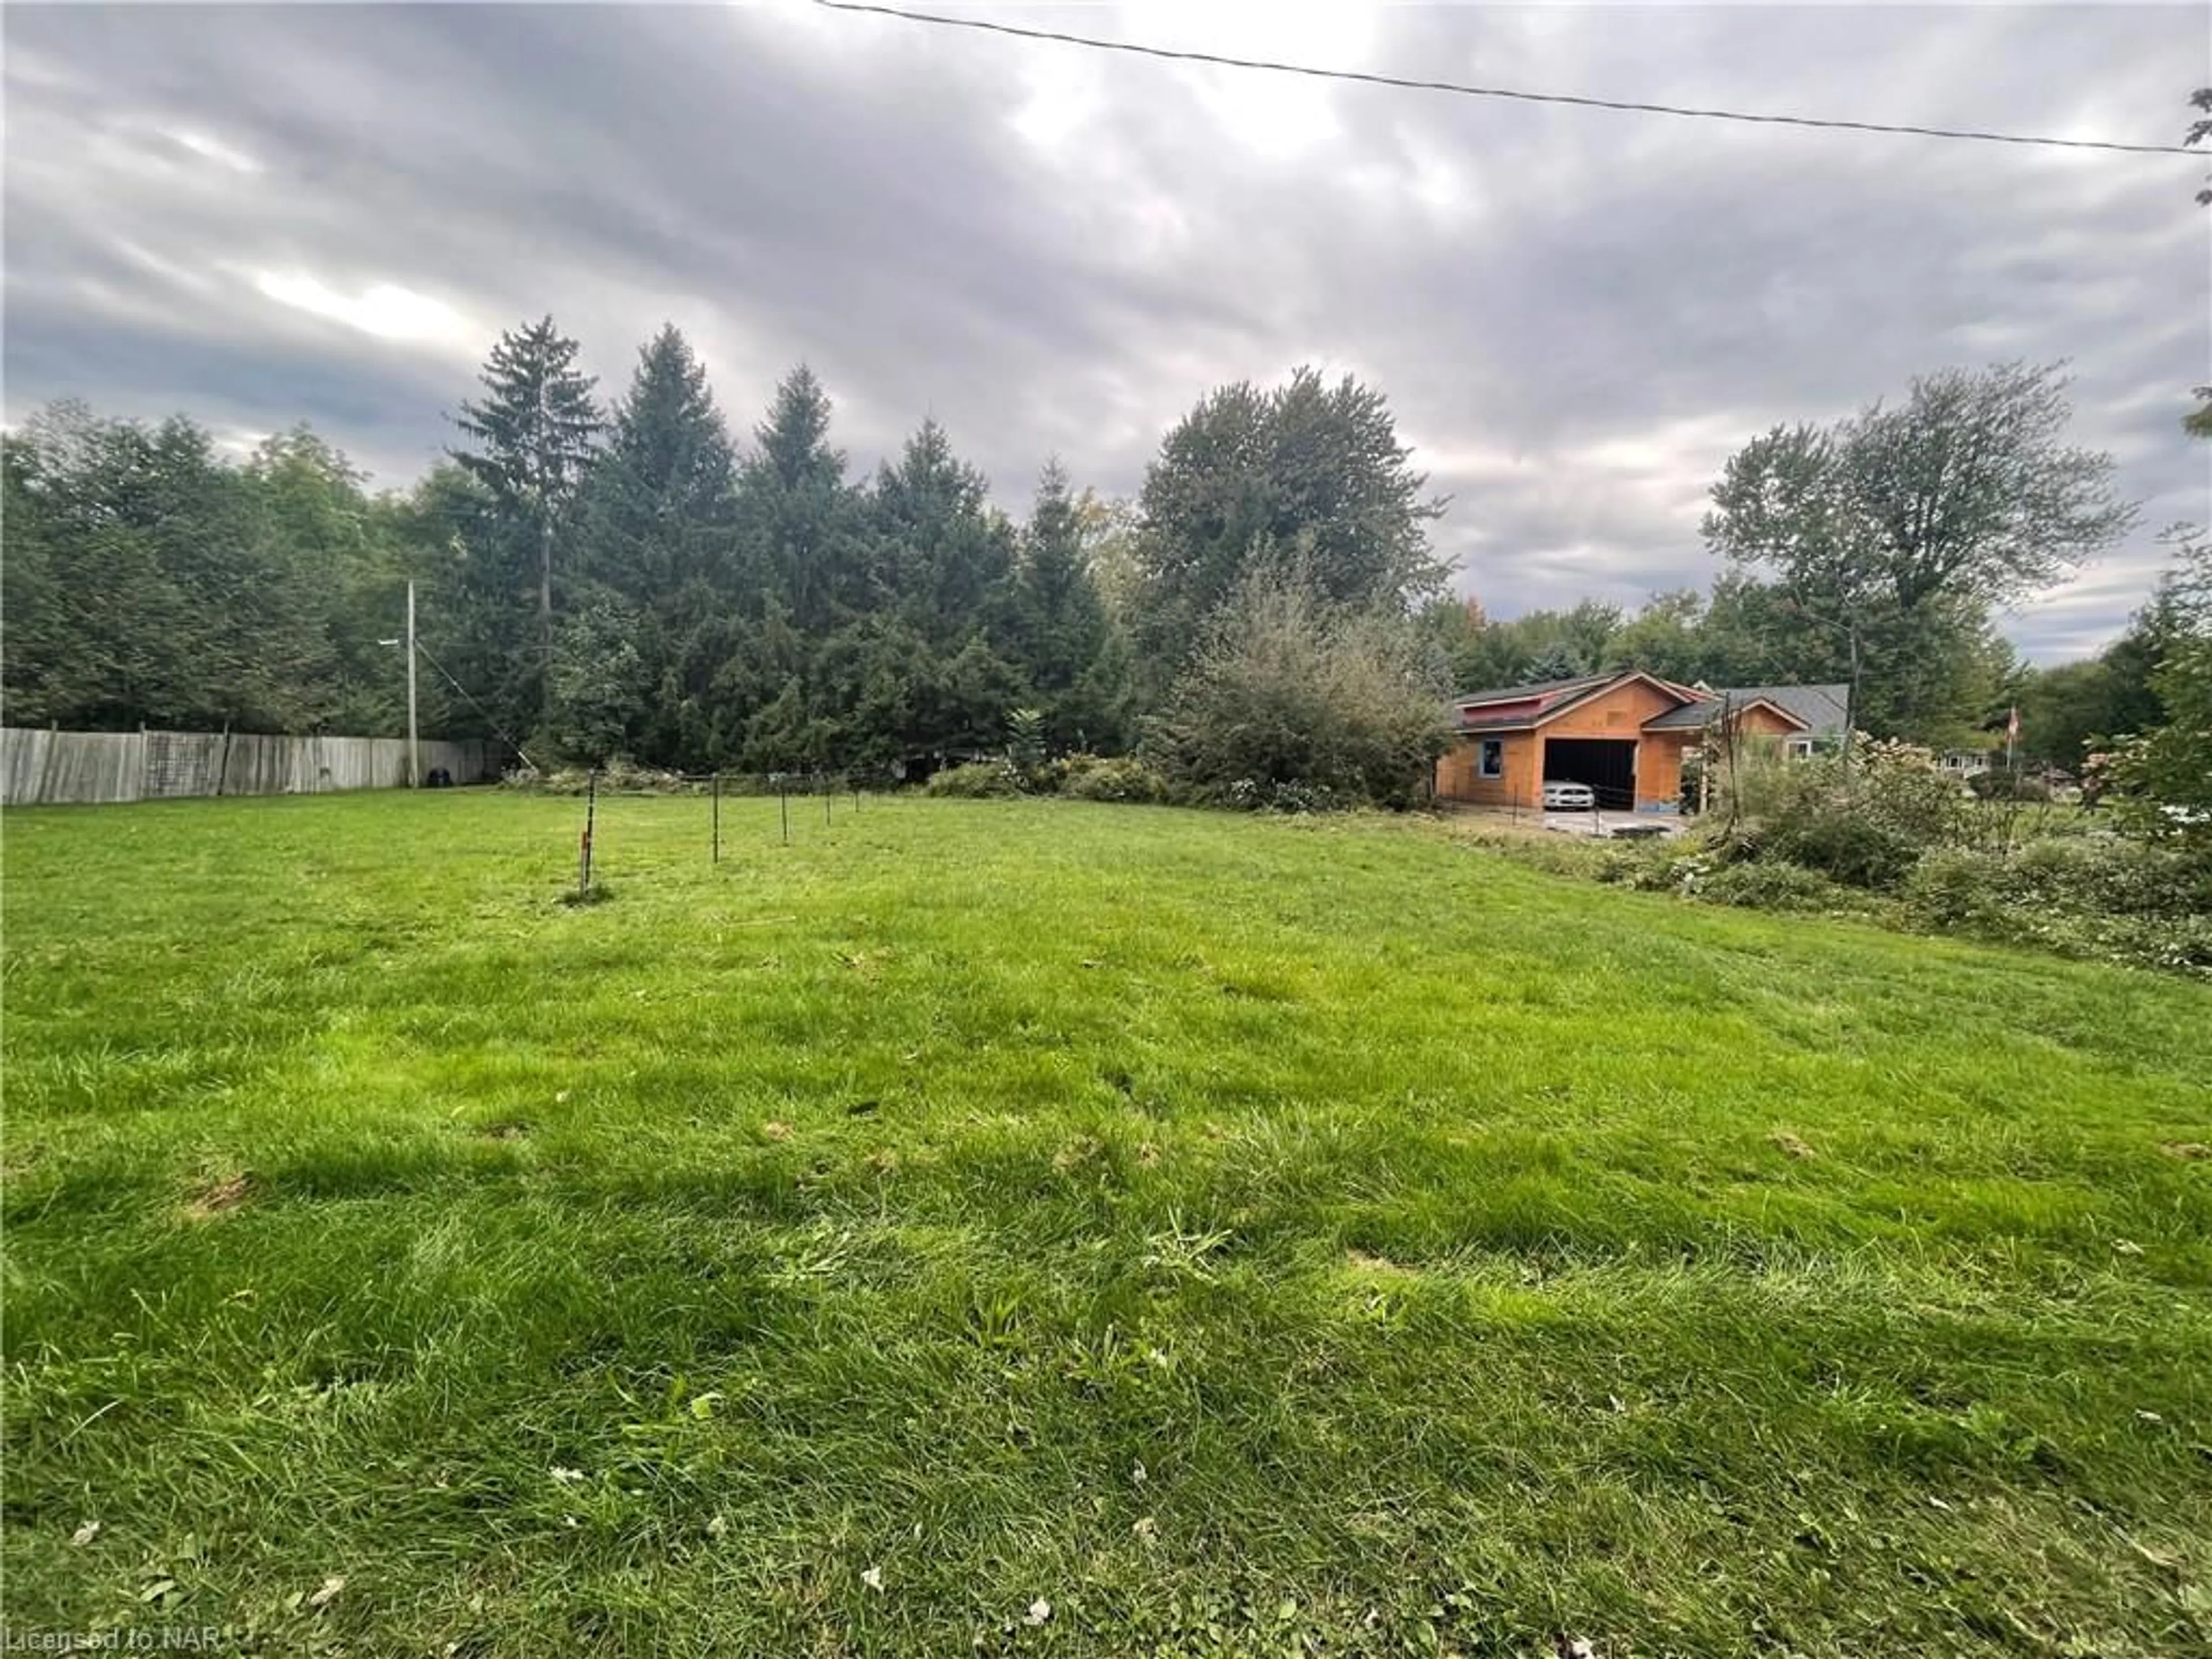 Shed for 313 Cherryhill Blvd #LOT 2, Crystal Beach Ontario L0S 1B0